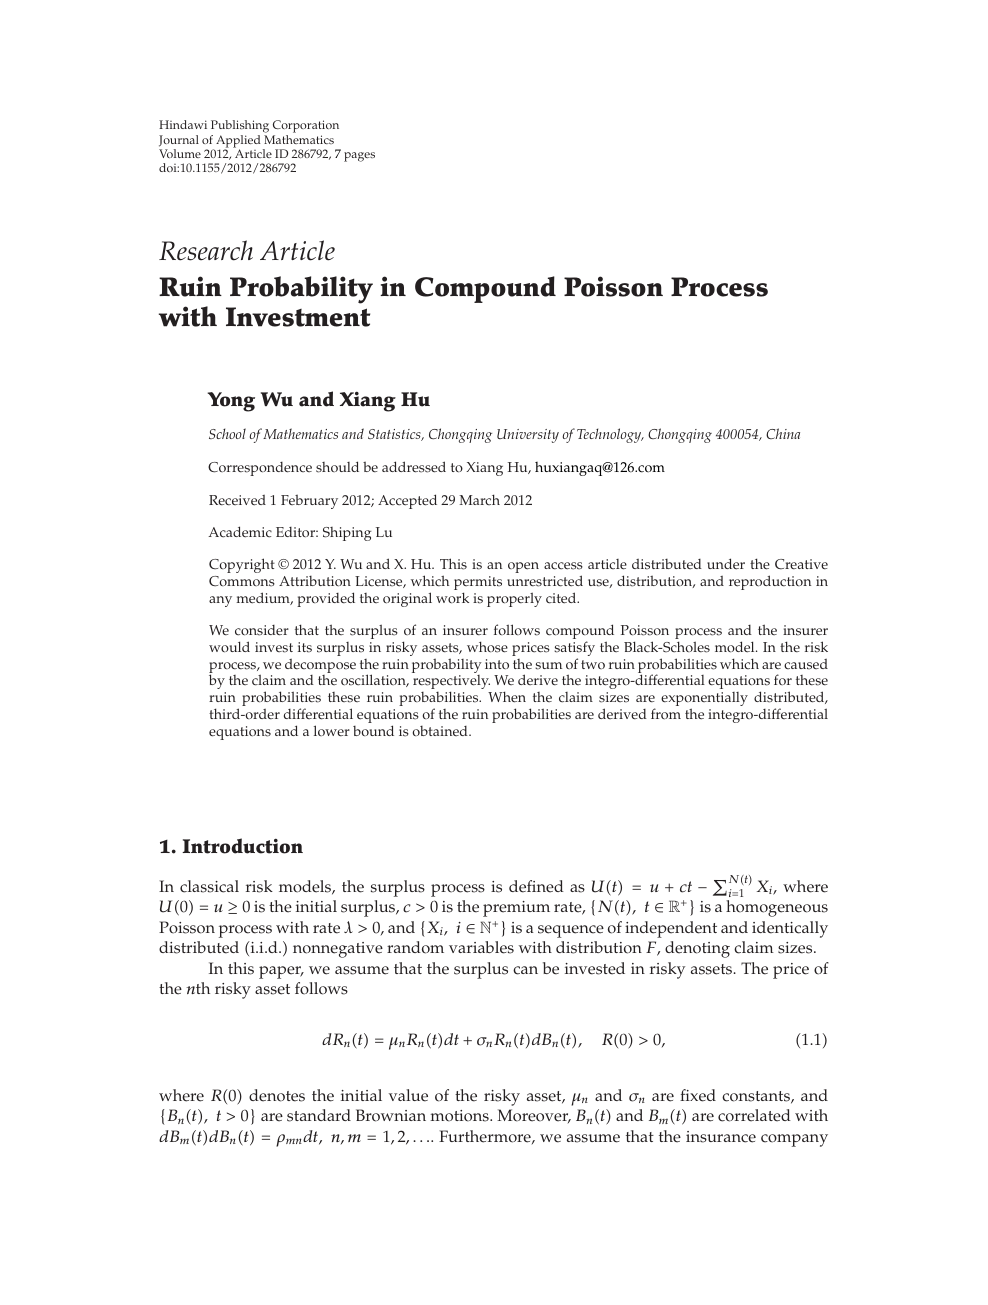 Ruin Probability In Compound Poisson Process With Investment Topic Of Research Paper In Mathematics Download Scholarly Article Pdf And Read For Free On Cyberleninka Open Science Hub